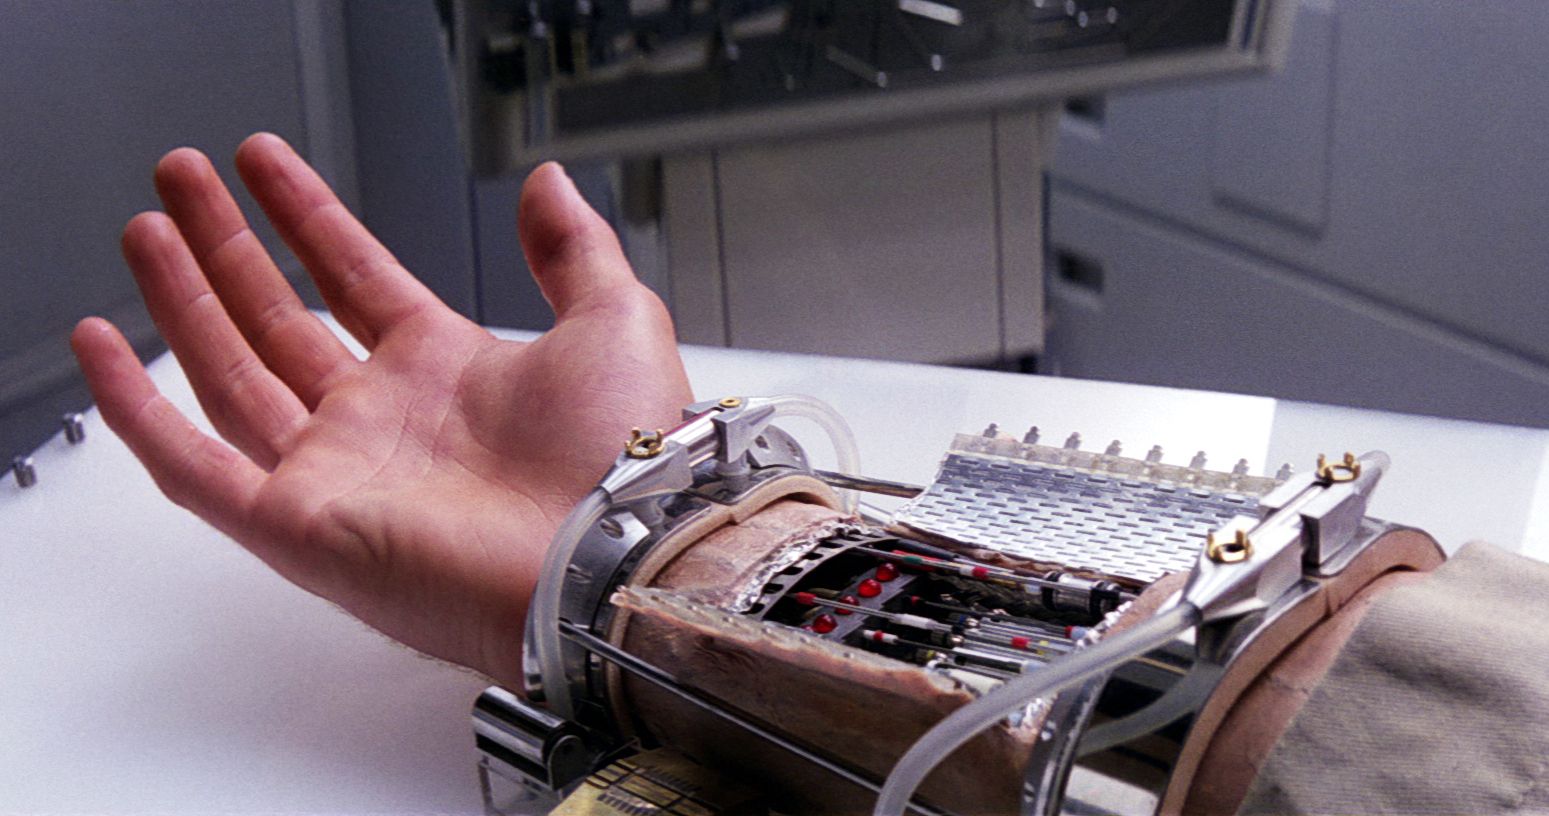 Artificial Skin Inspired by The Empire Strikes Back Has a Sense of Touch